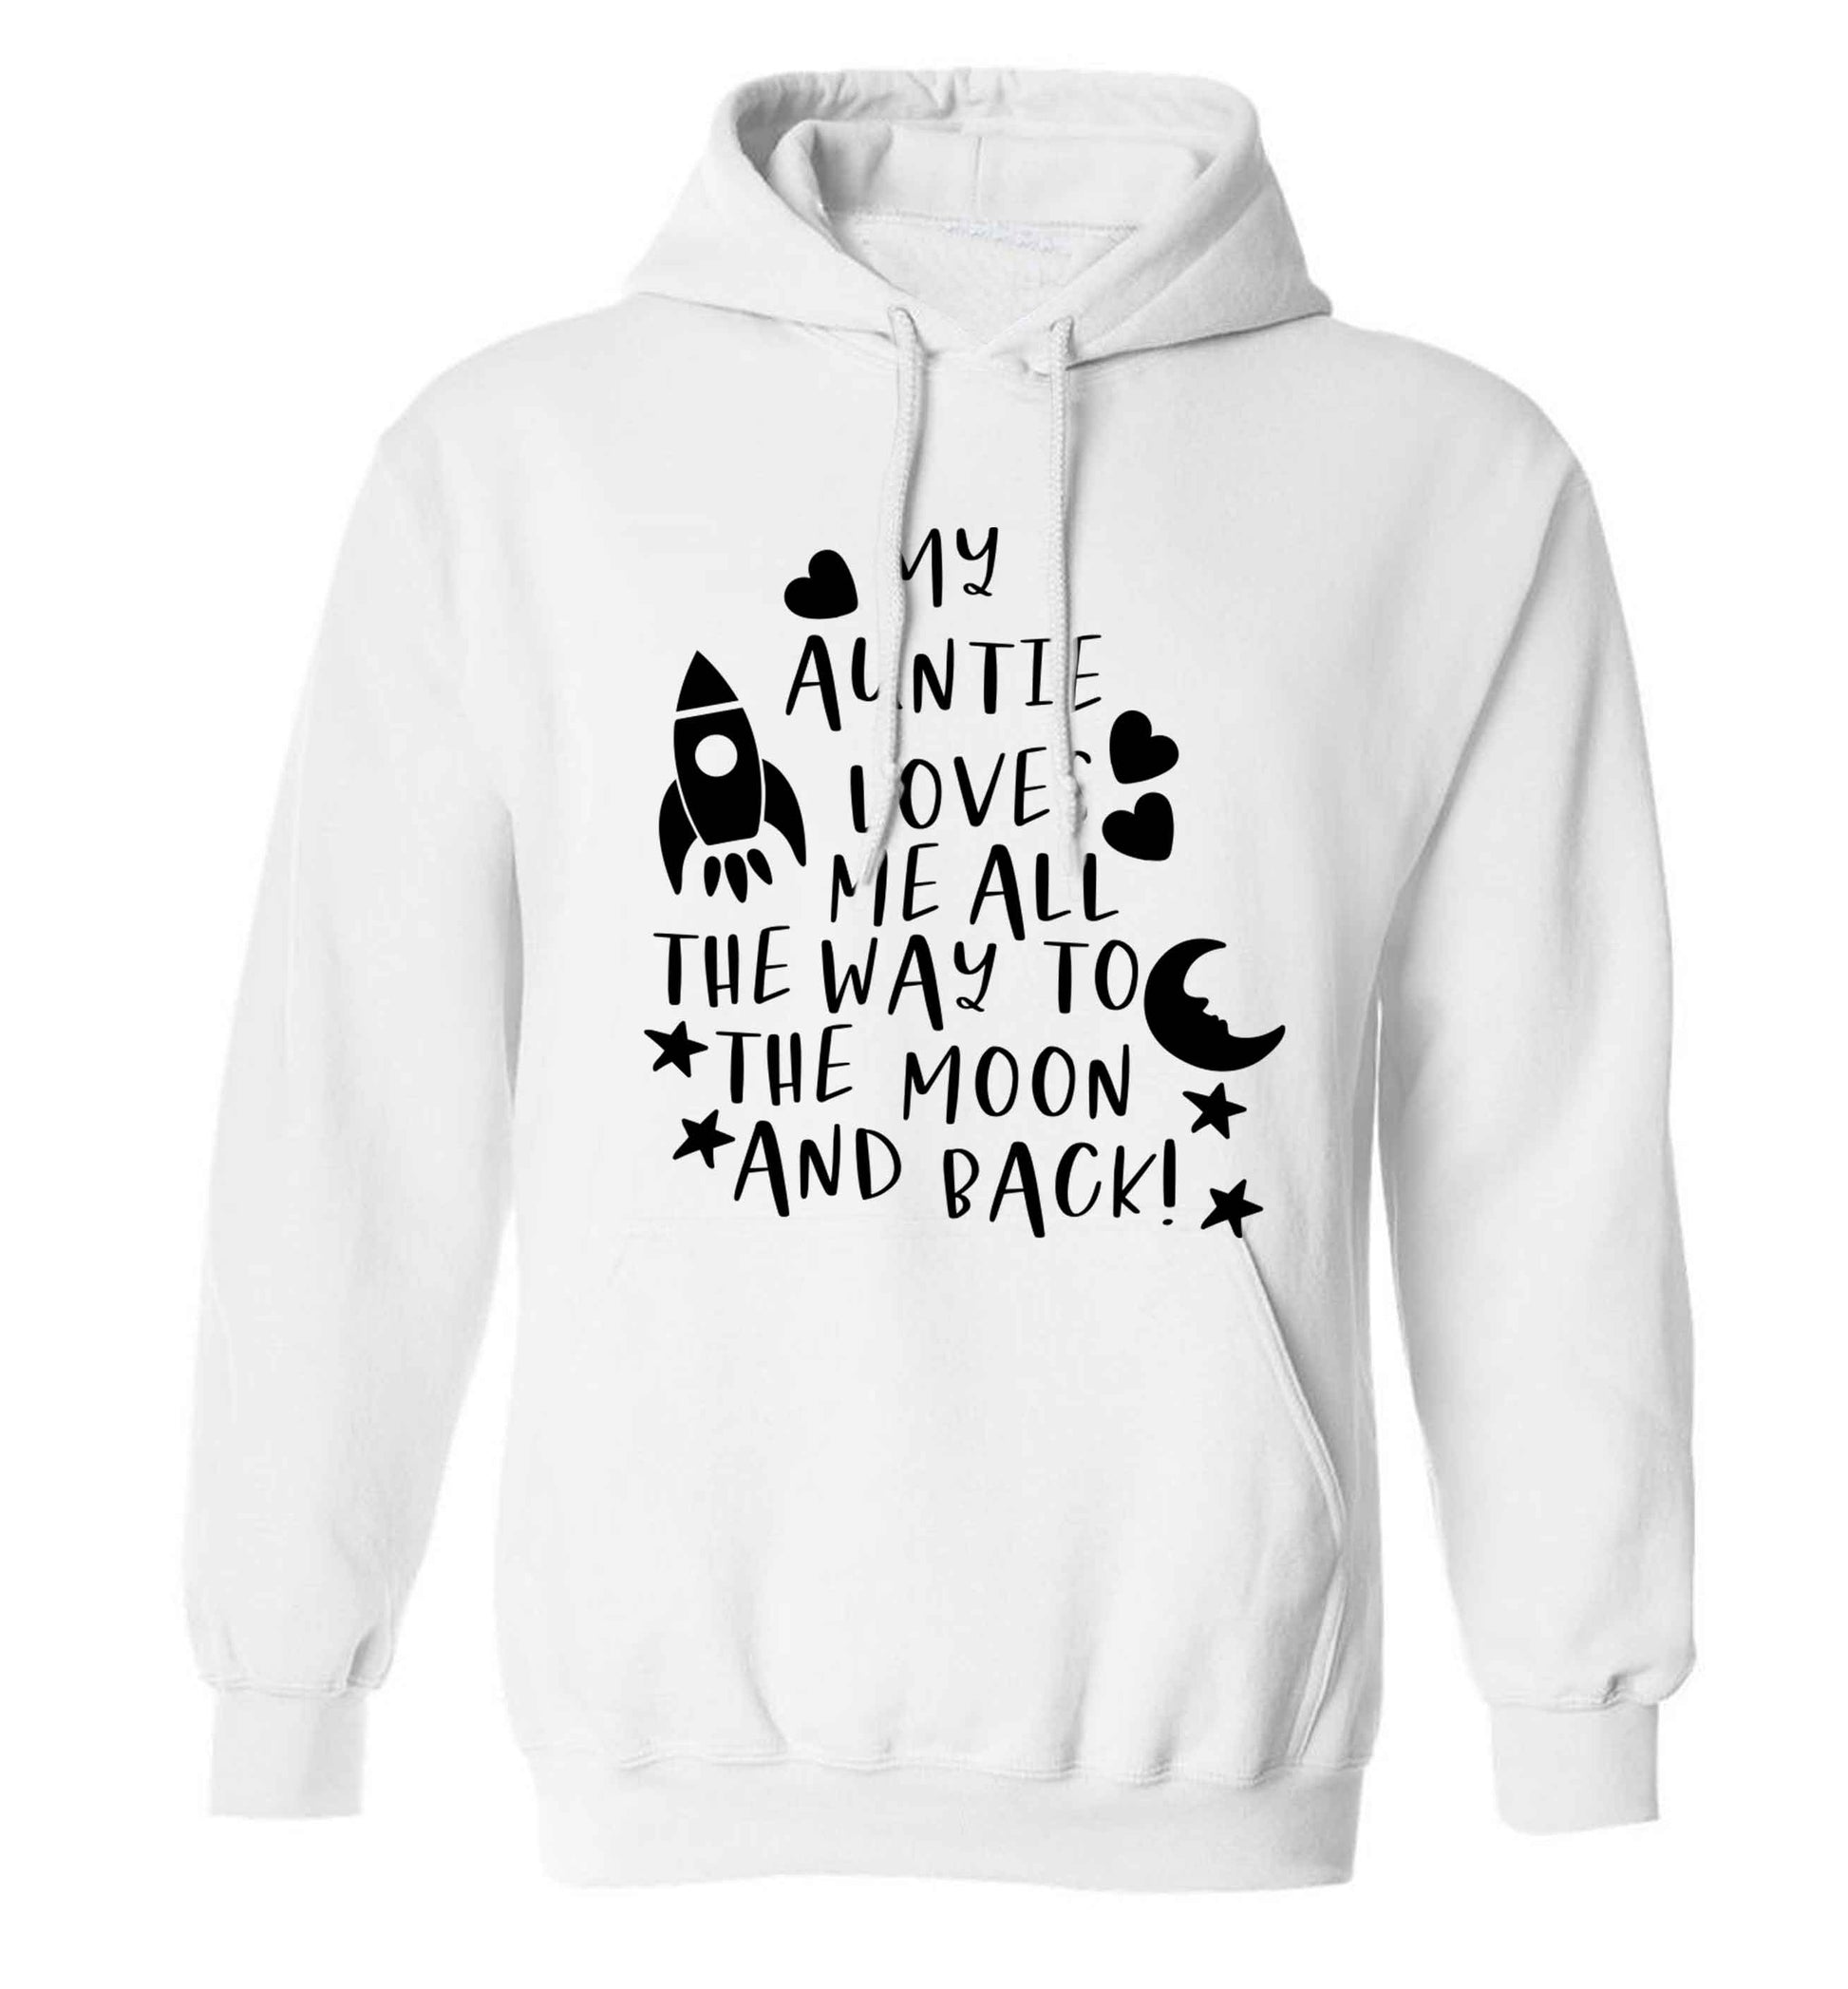 My auntie loves me all the way to the moon and back adults unisex white hoodie 2XL